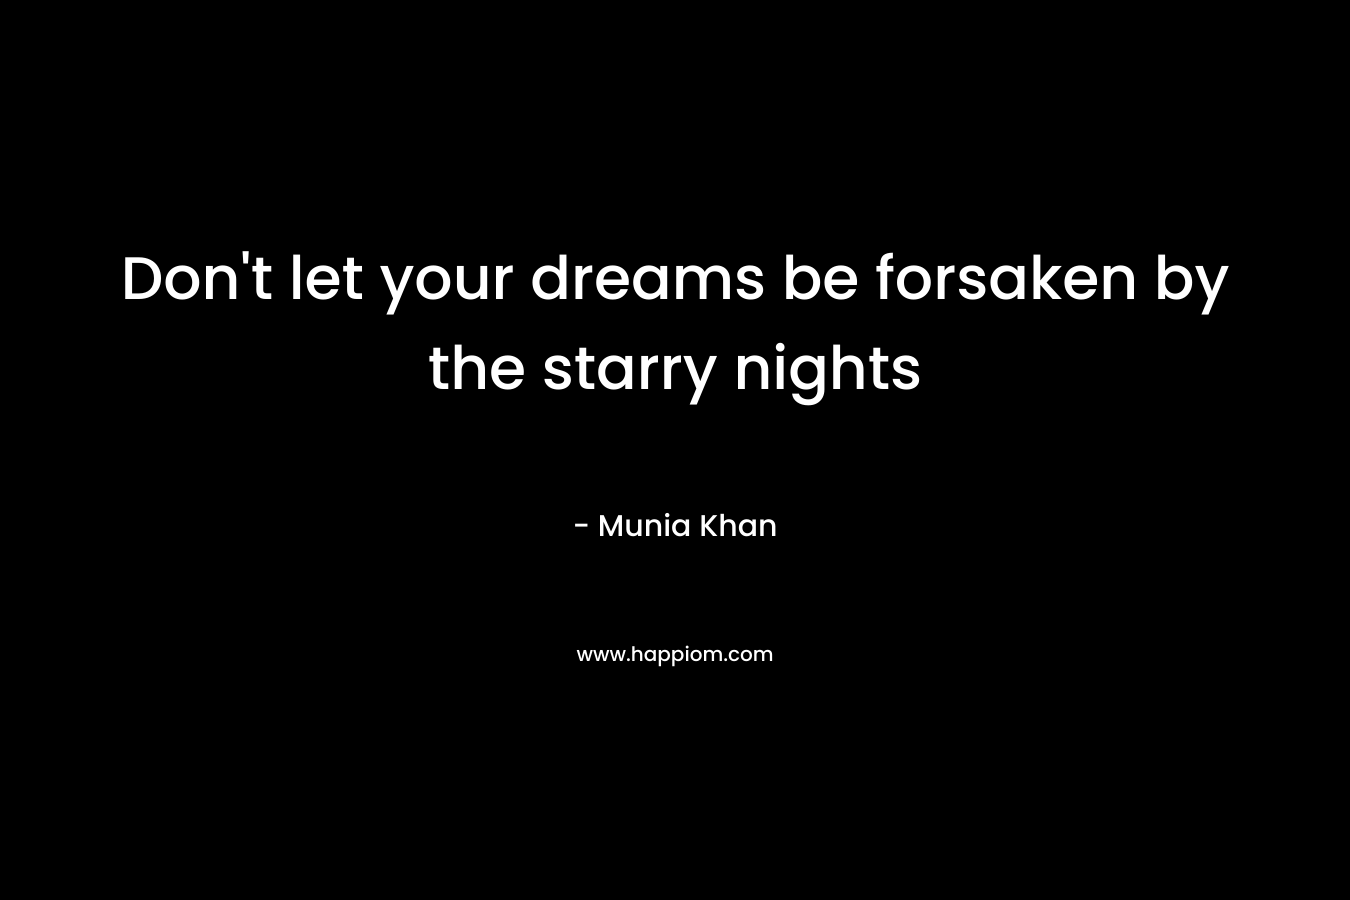 Don't let your dreams be forsaken by the starry nights